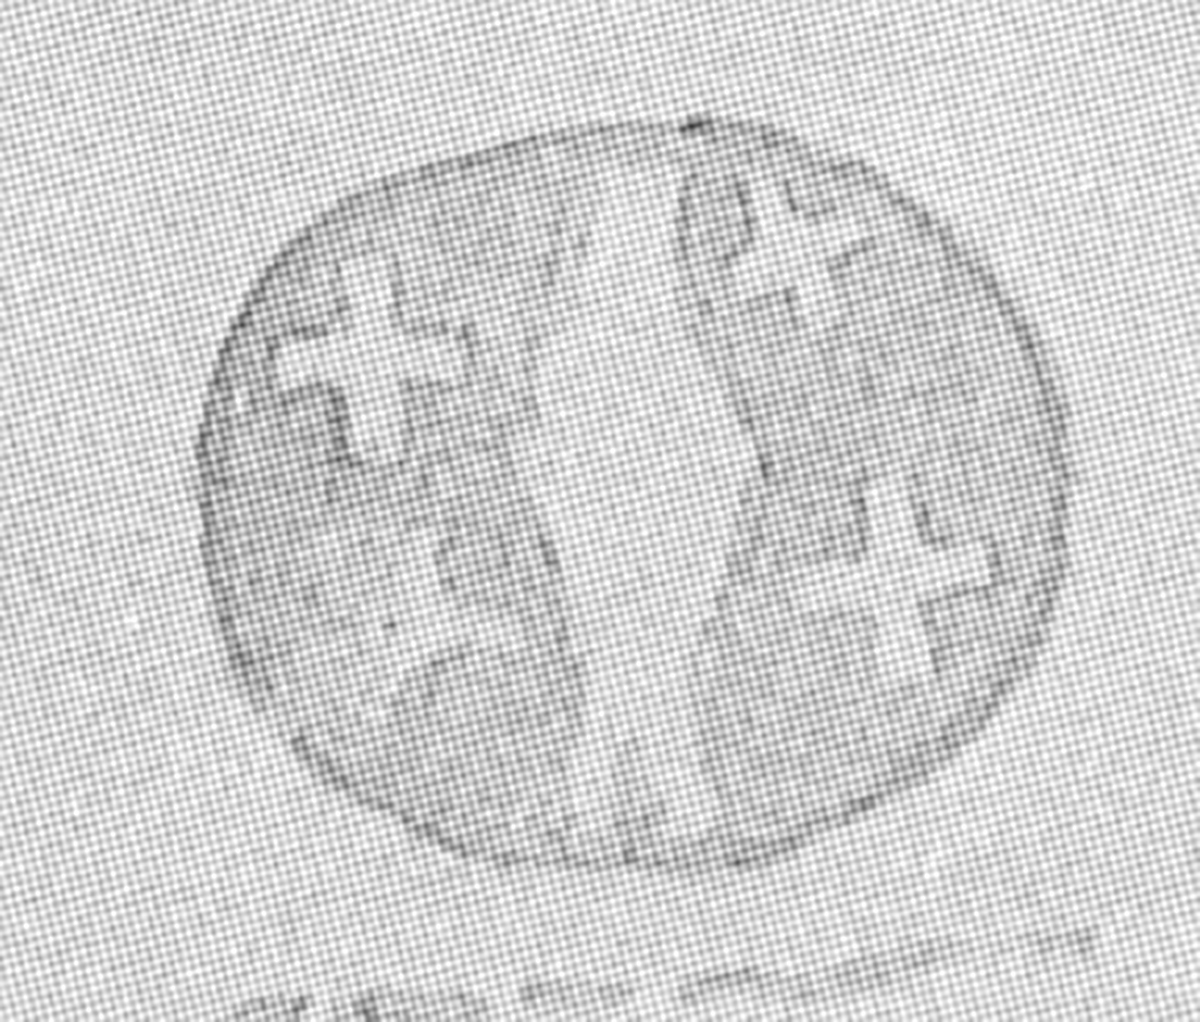 The circle-shaped enigmatic with cross-shapes (Figure H) as illustrated by Kirkland.